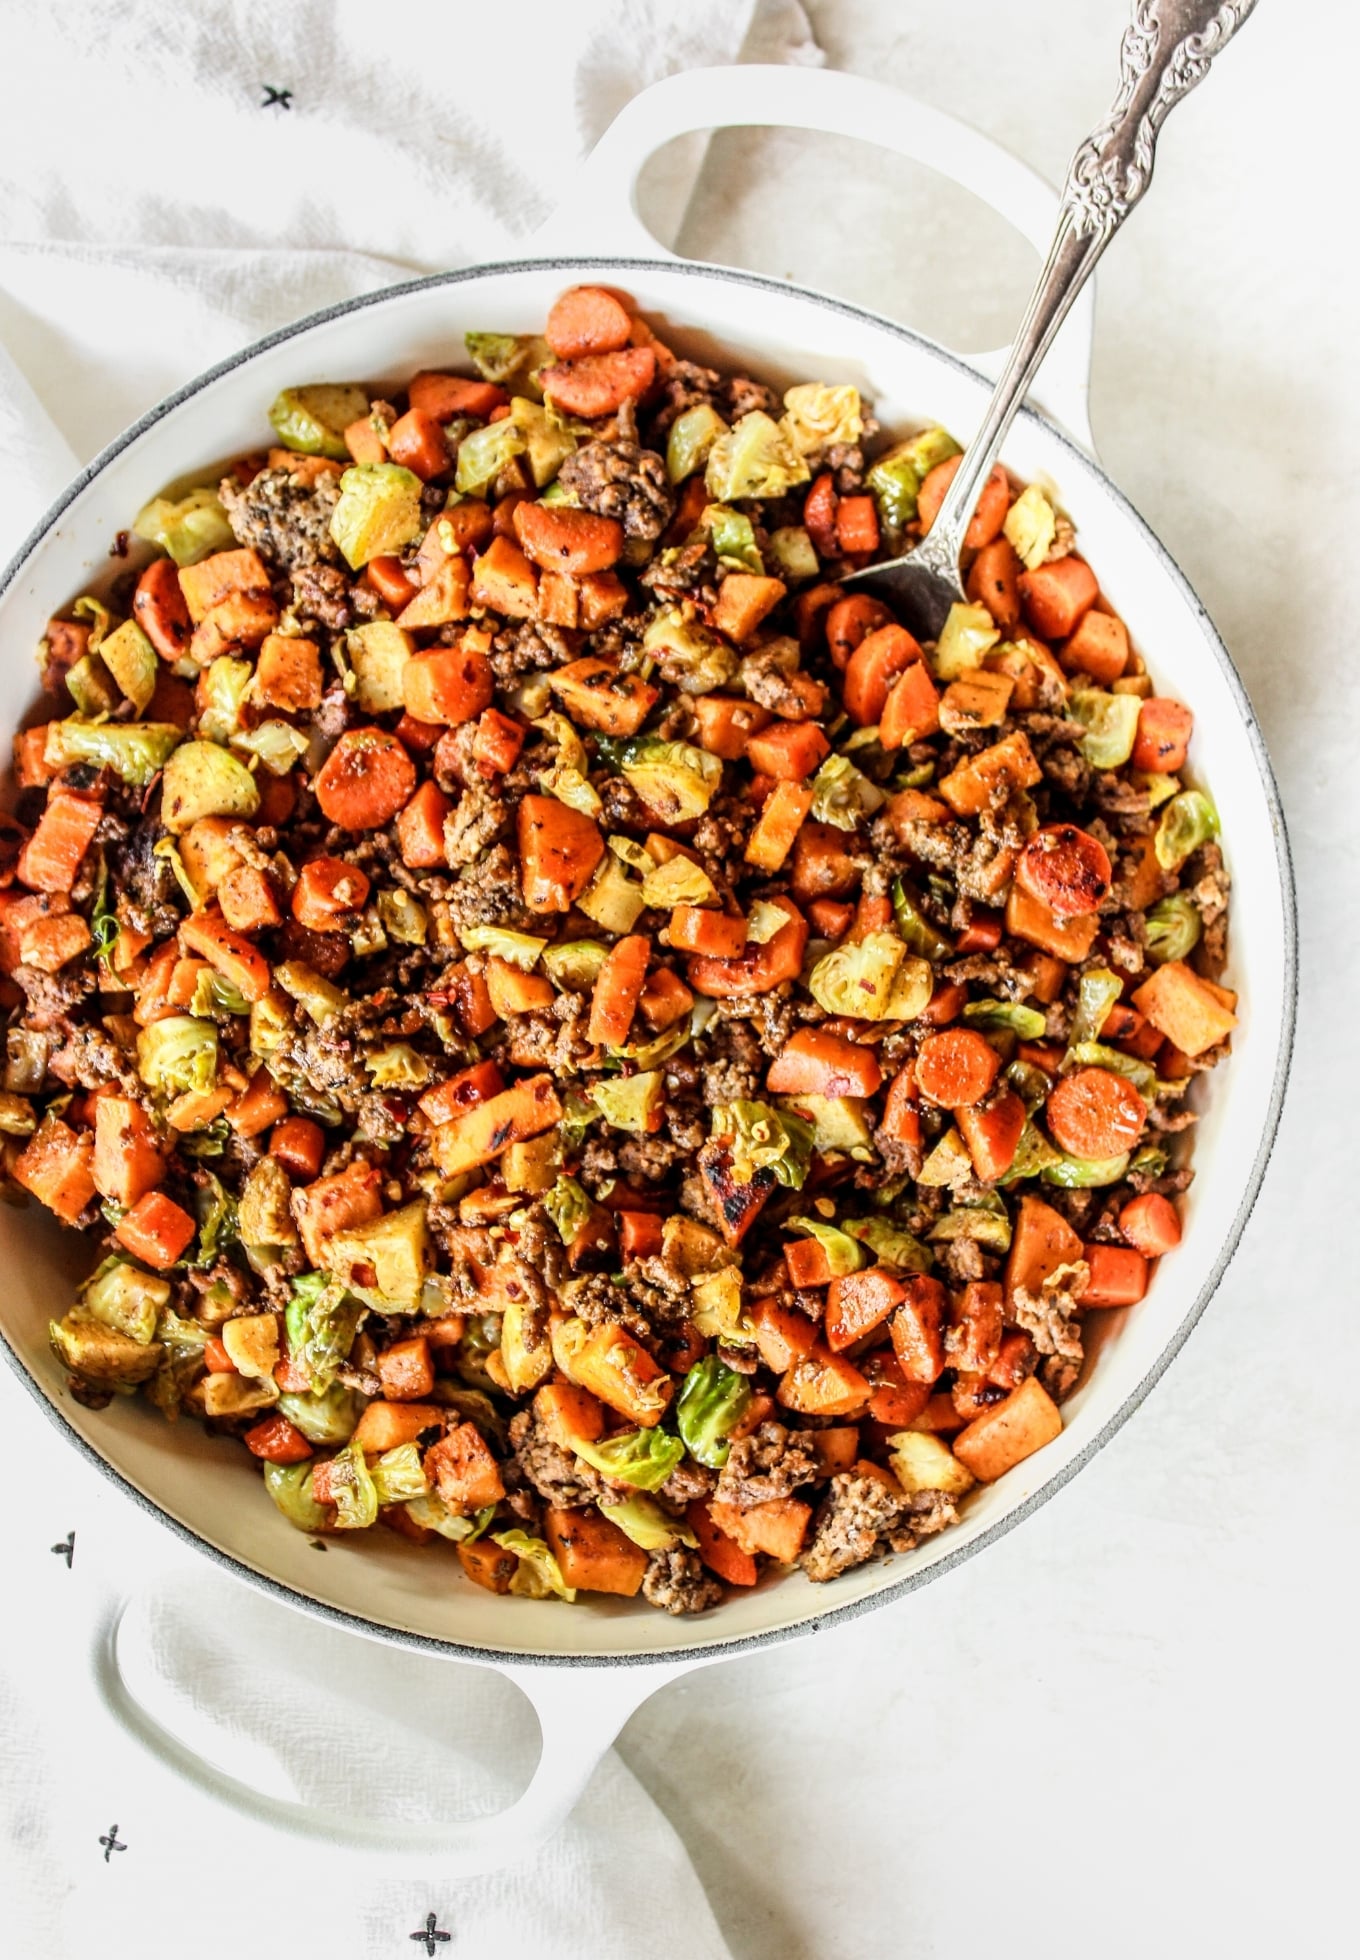 https://thewholecook.com/wp-content/uploads/2020/10/Ground-Beef-Sweet-Potato-Skillet-by-The-Whole-Cook-vertical.jpg